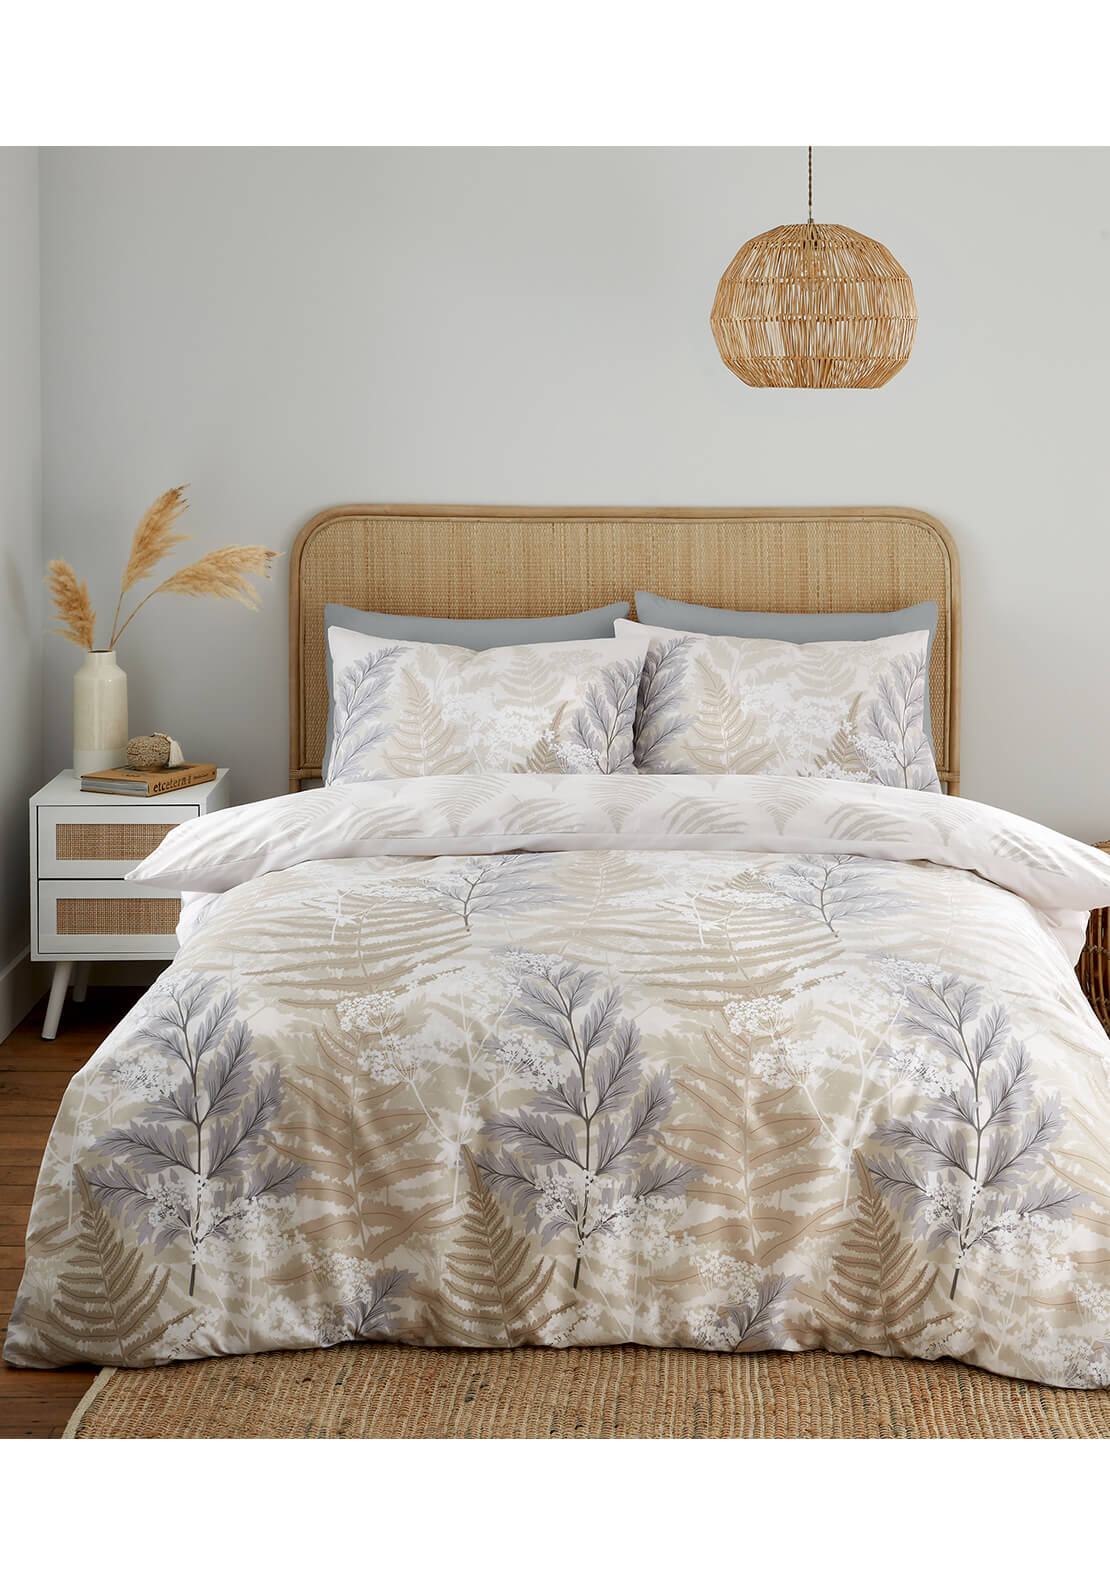  The Home Collection Botanical Fern Floral Reversible Duvet Cover Set - Natural 1 Shaws Department Stores